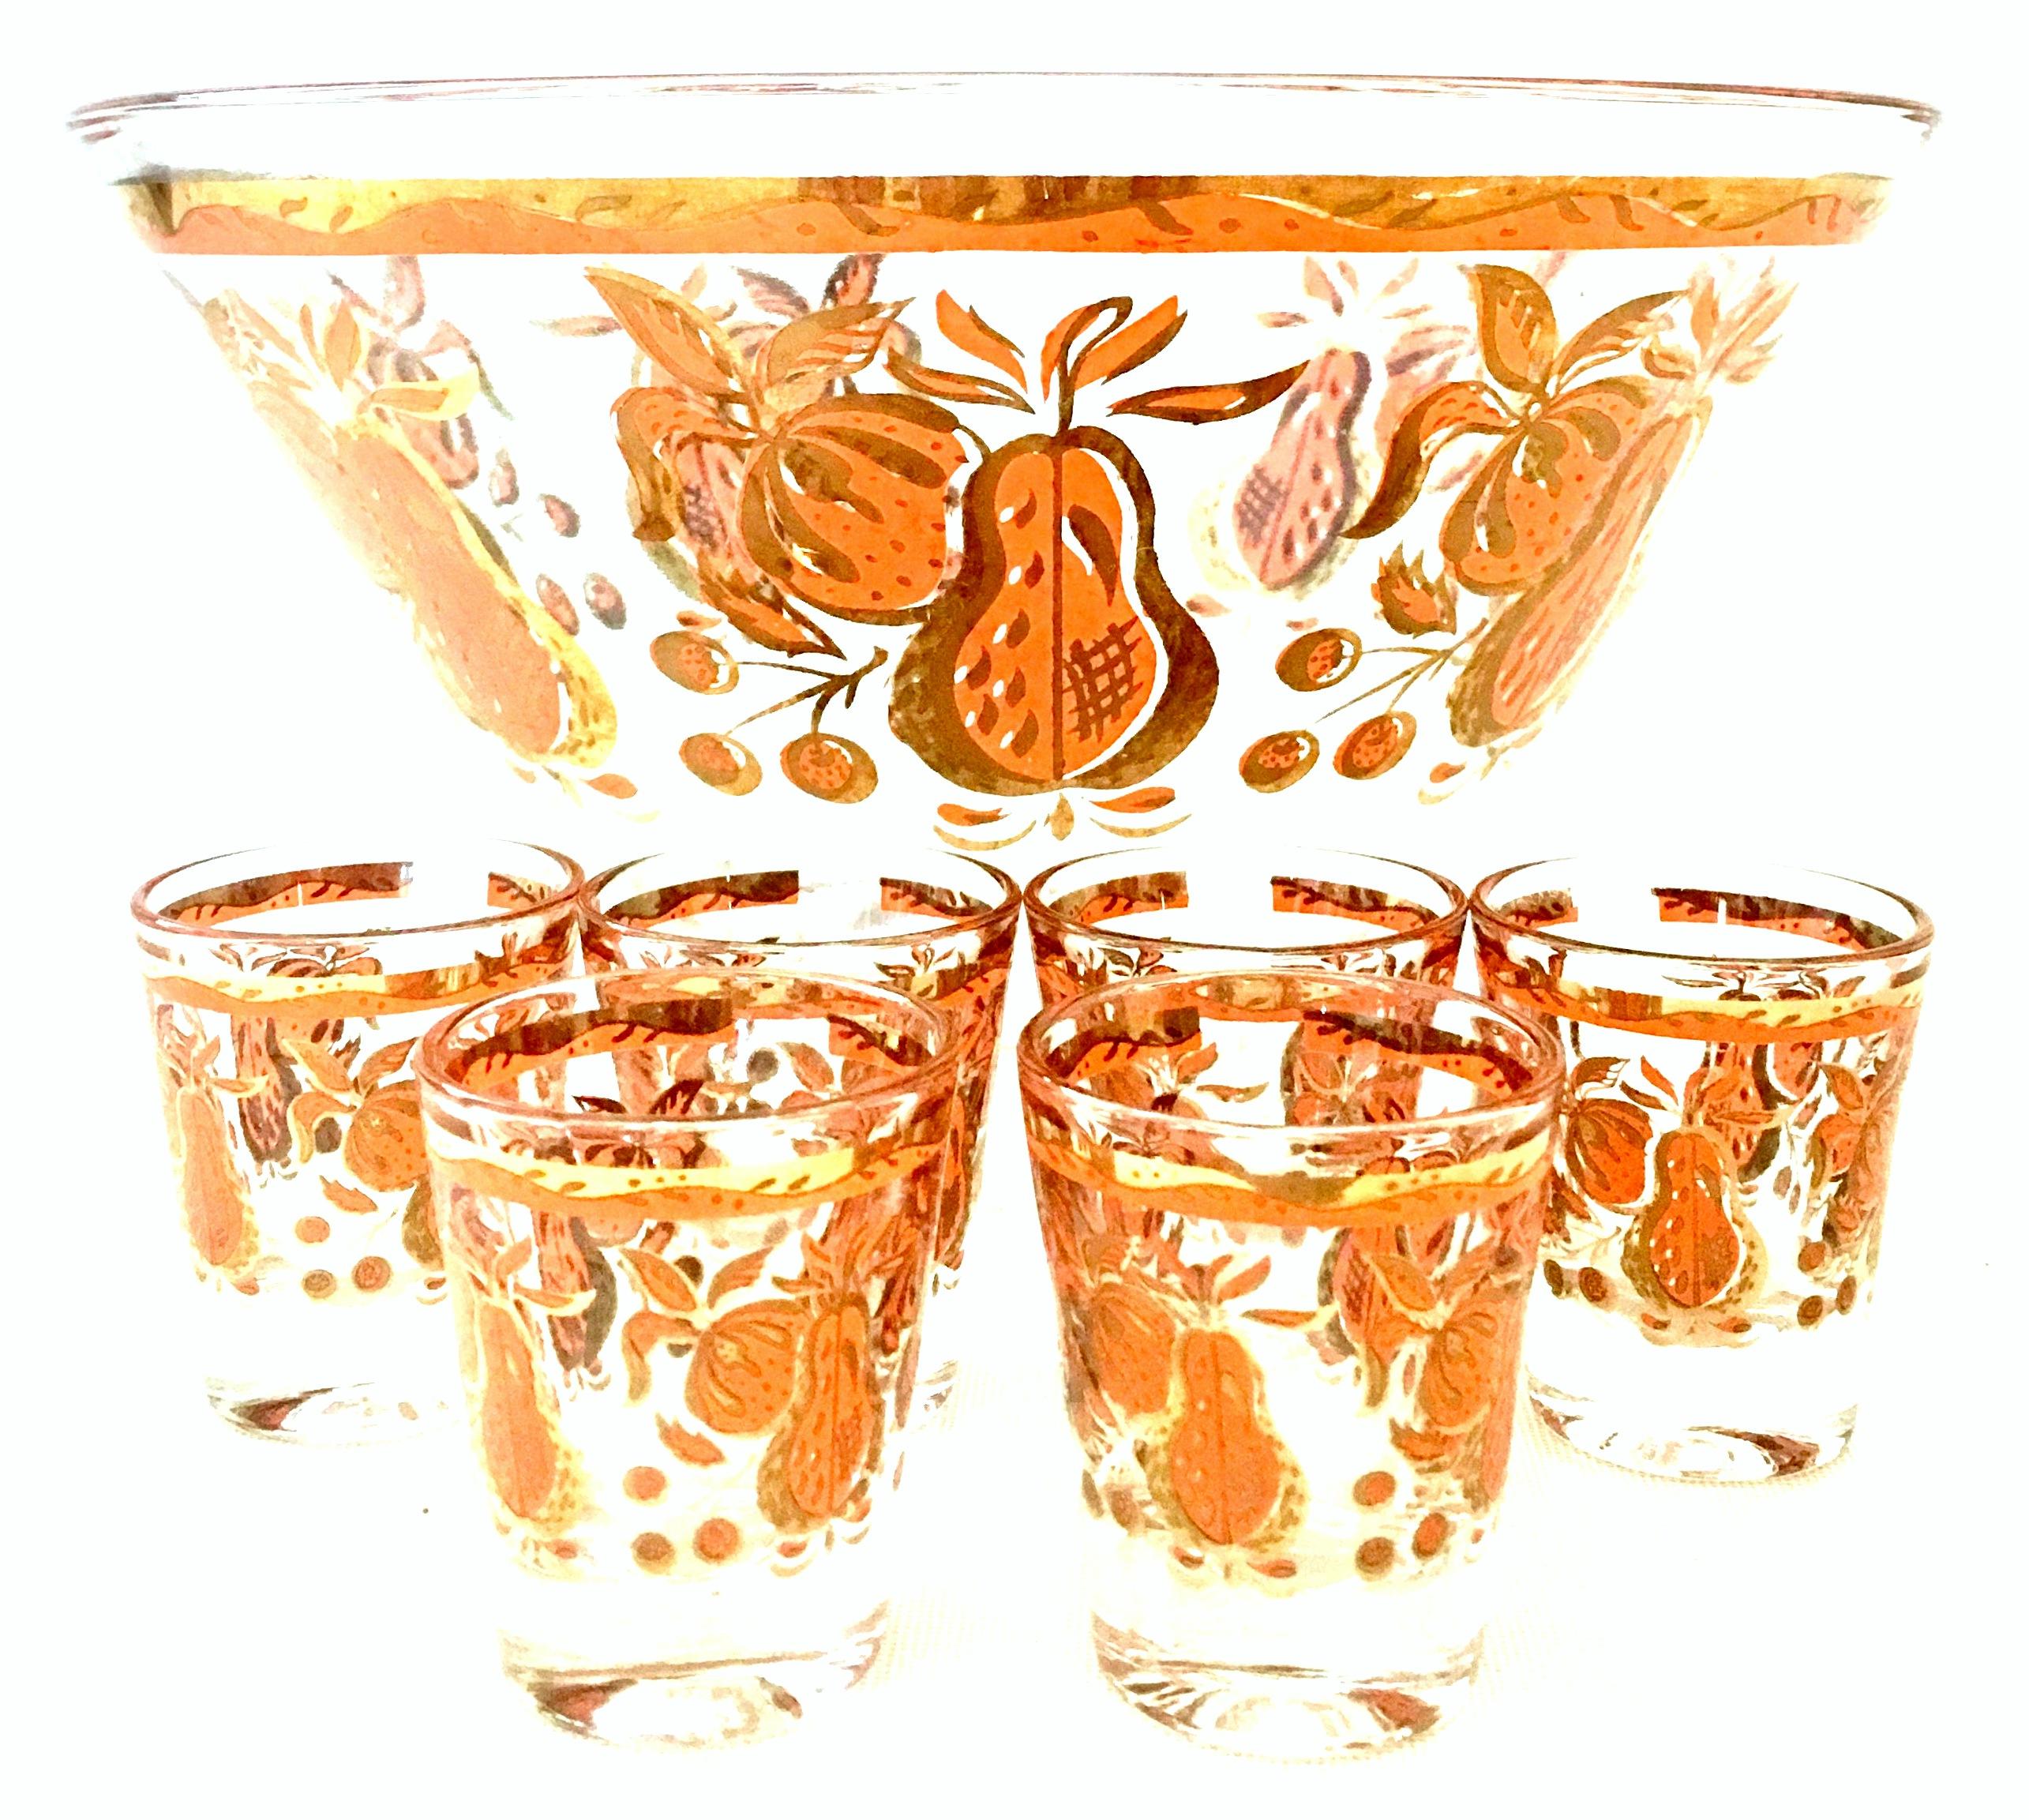 Mid-20th century blown glass and 22-karat gold drinks set by, Georges Briard and Blenko glass-set of eleven pieces. Set includes one large serving bowl and six shot glasses by Georges Briard and four textured tumblers by, Blenko Glass. The Briard